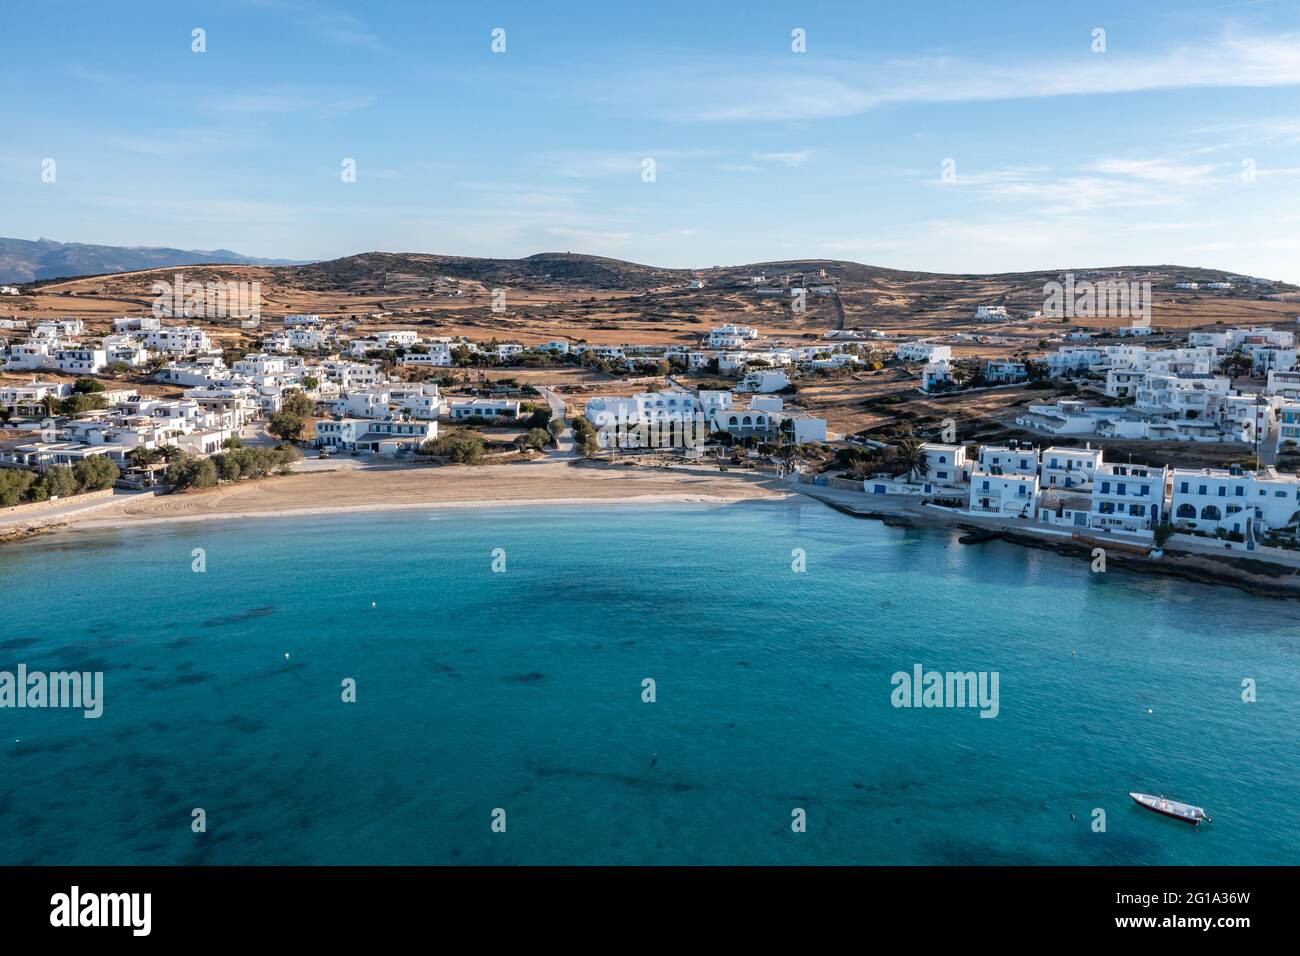 Pano High Resolution Stock Photography and Images - Alamy